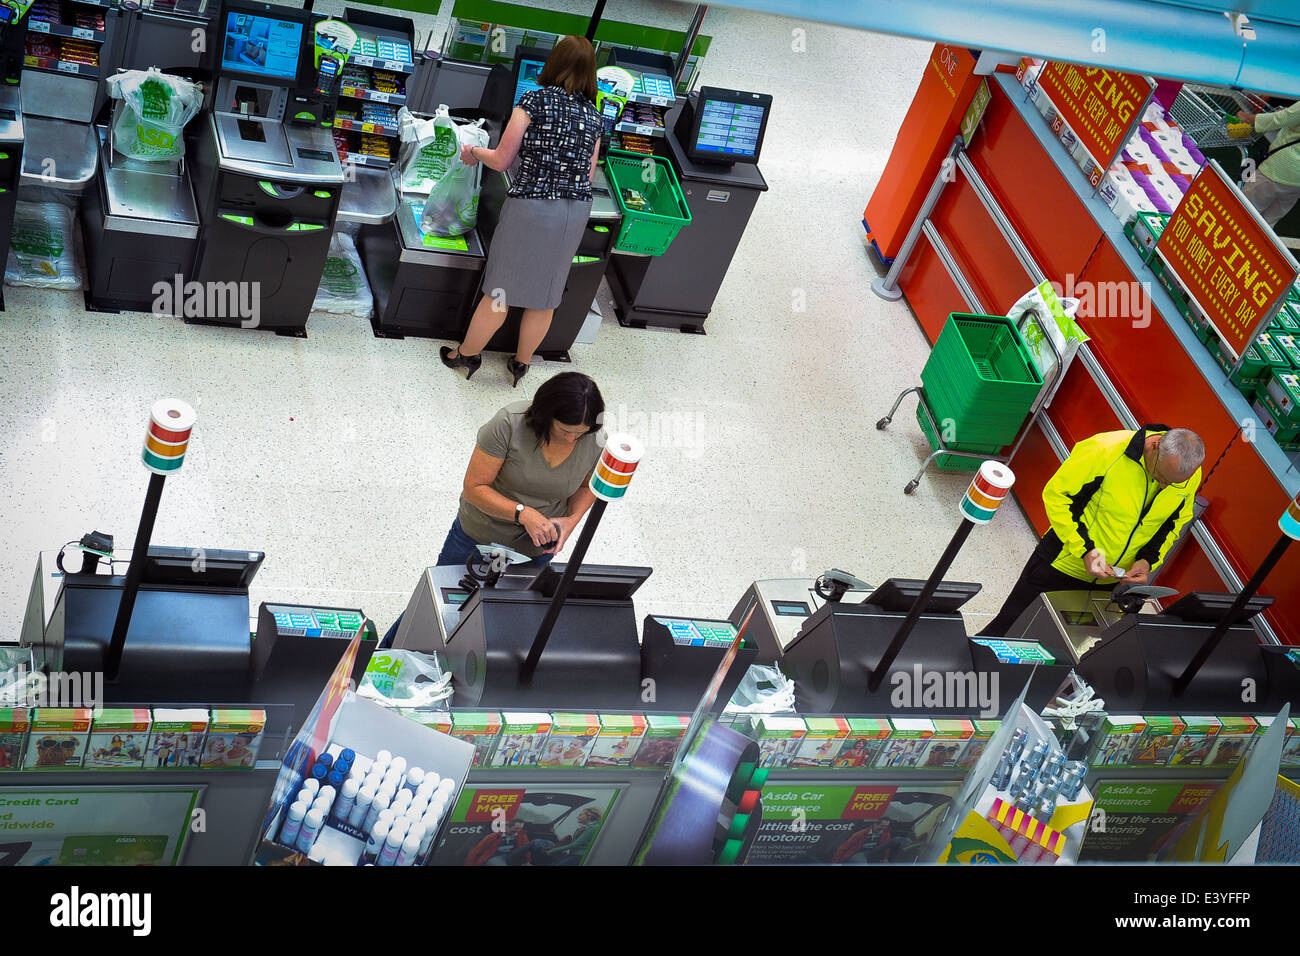 3 people shopping at supermarket self-service check-outs Stock Photo